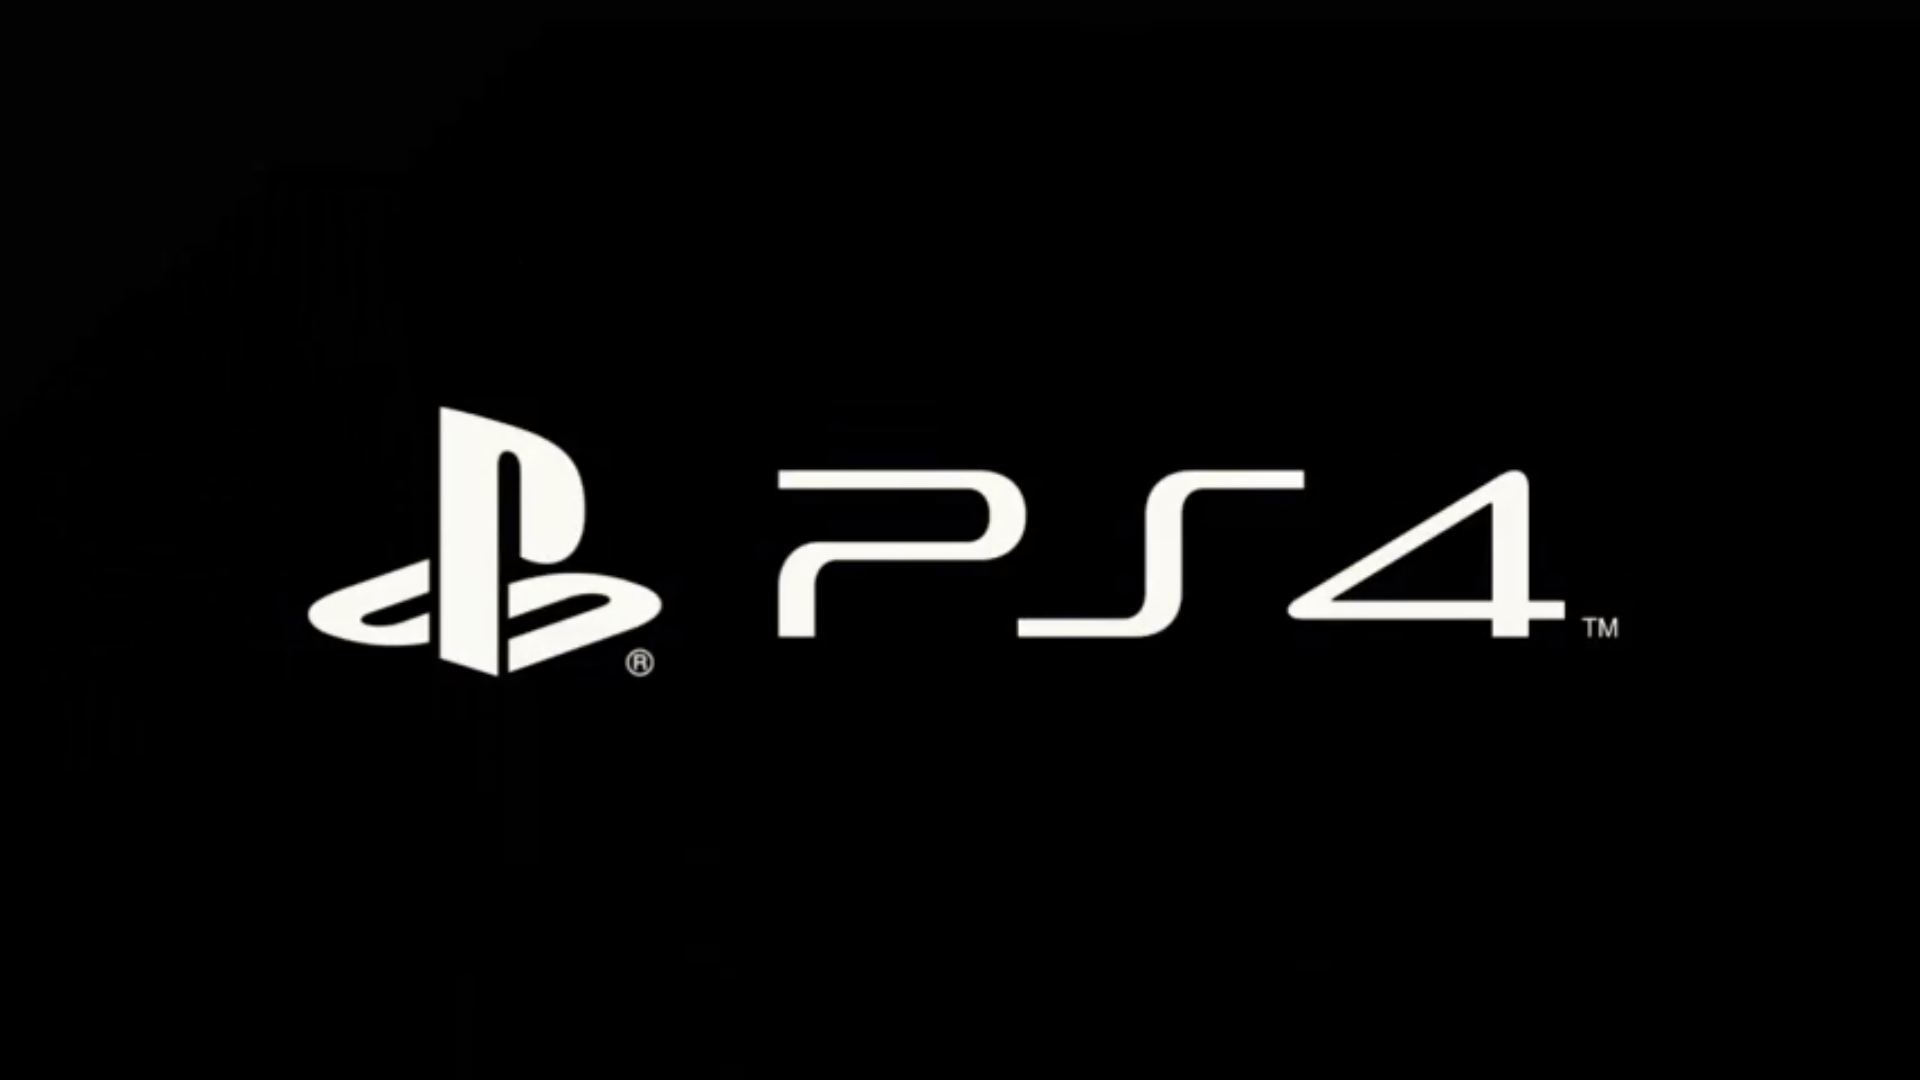 PS4 Logo wallpapers and images   wallpapers pictures photos